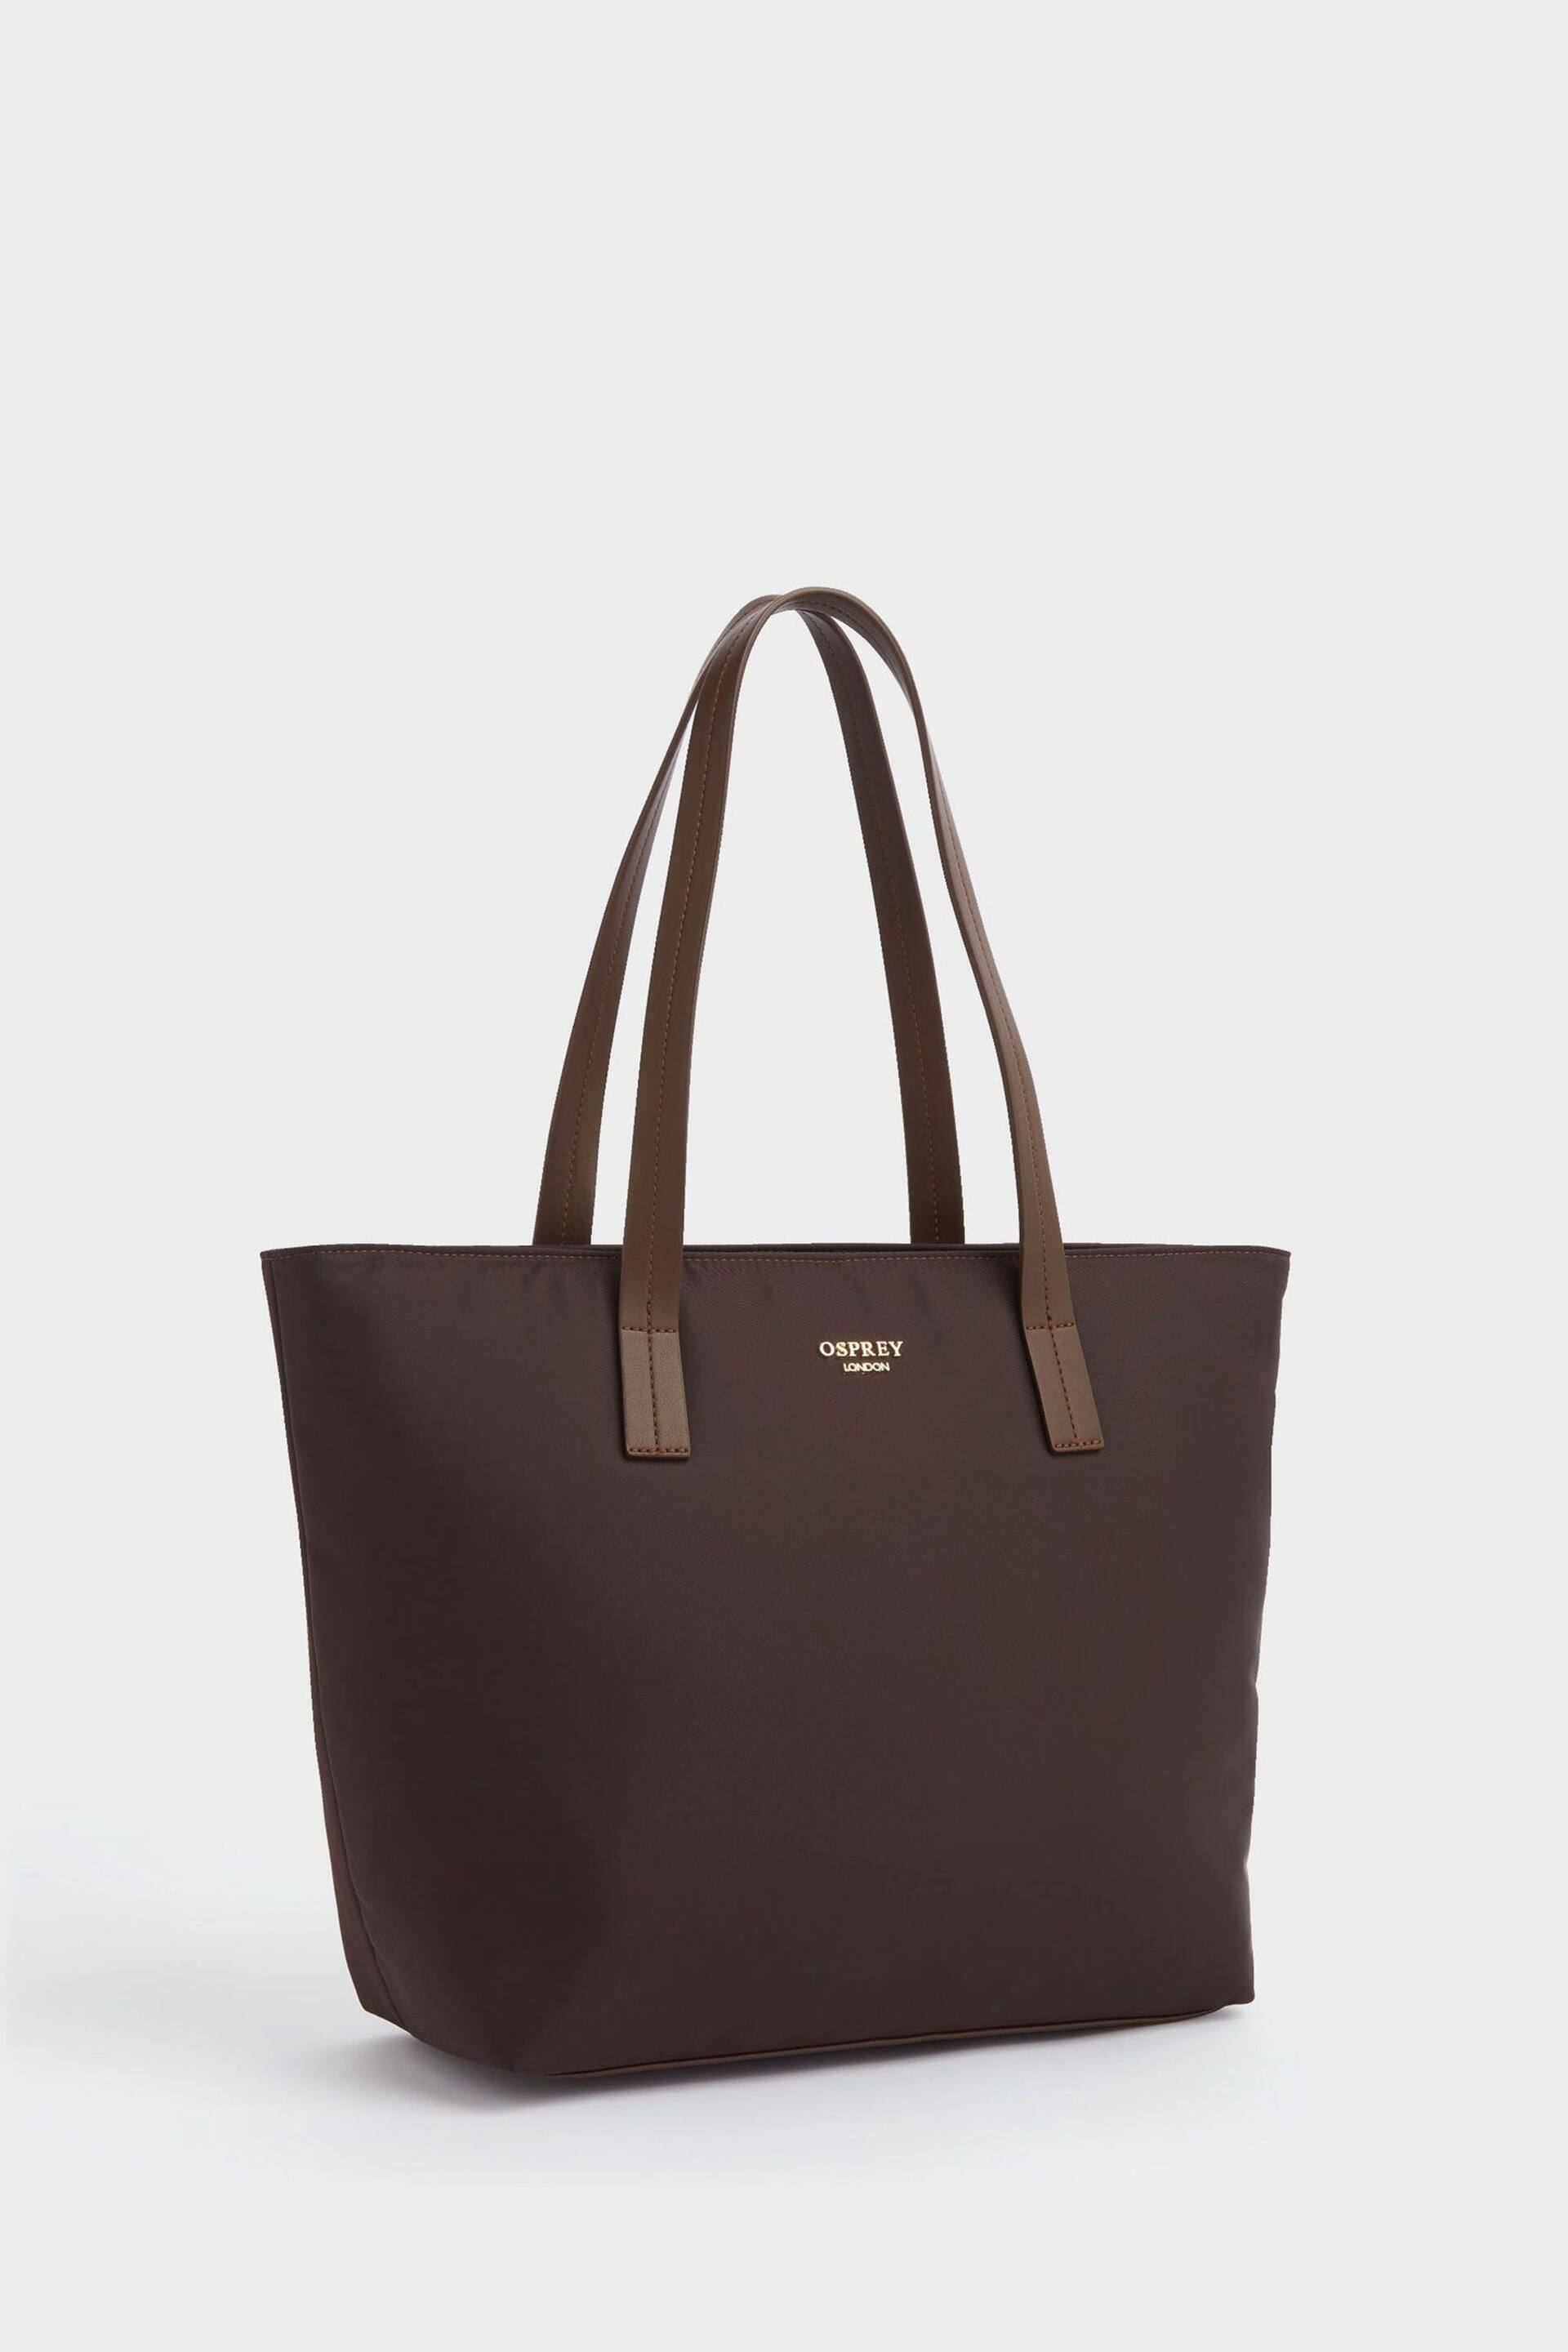 OSPREY LONDON The Wanderer Nylon Tote Bag With RFID Protection - Image 2 of 5